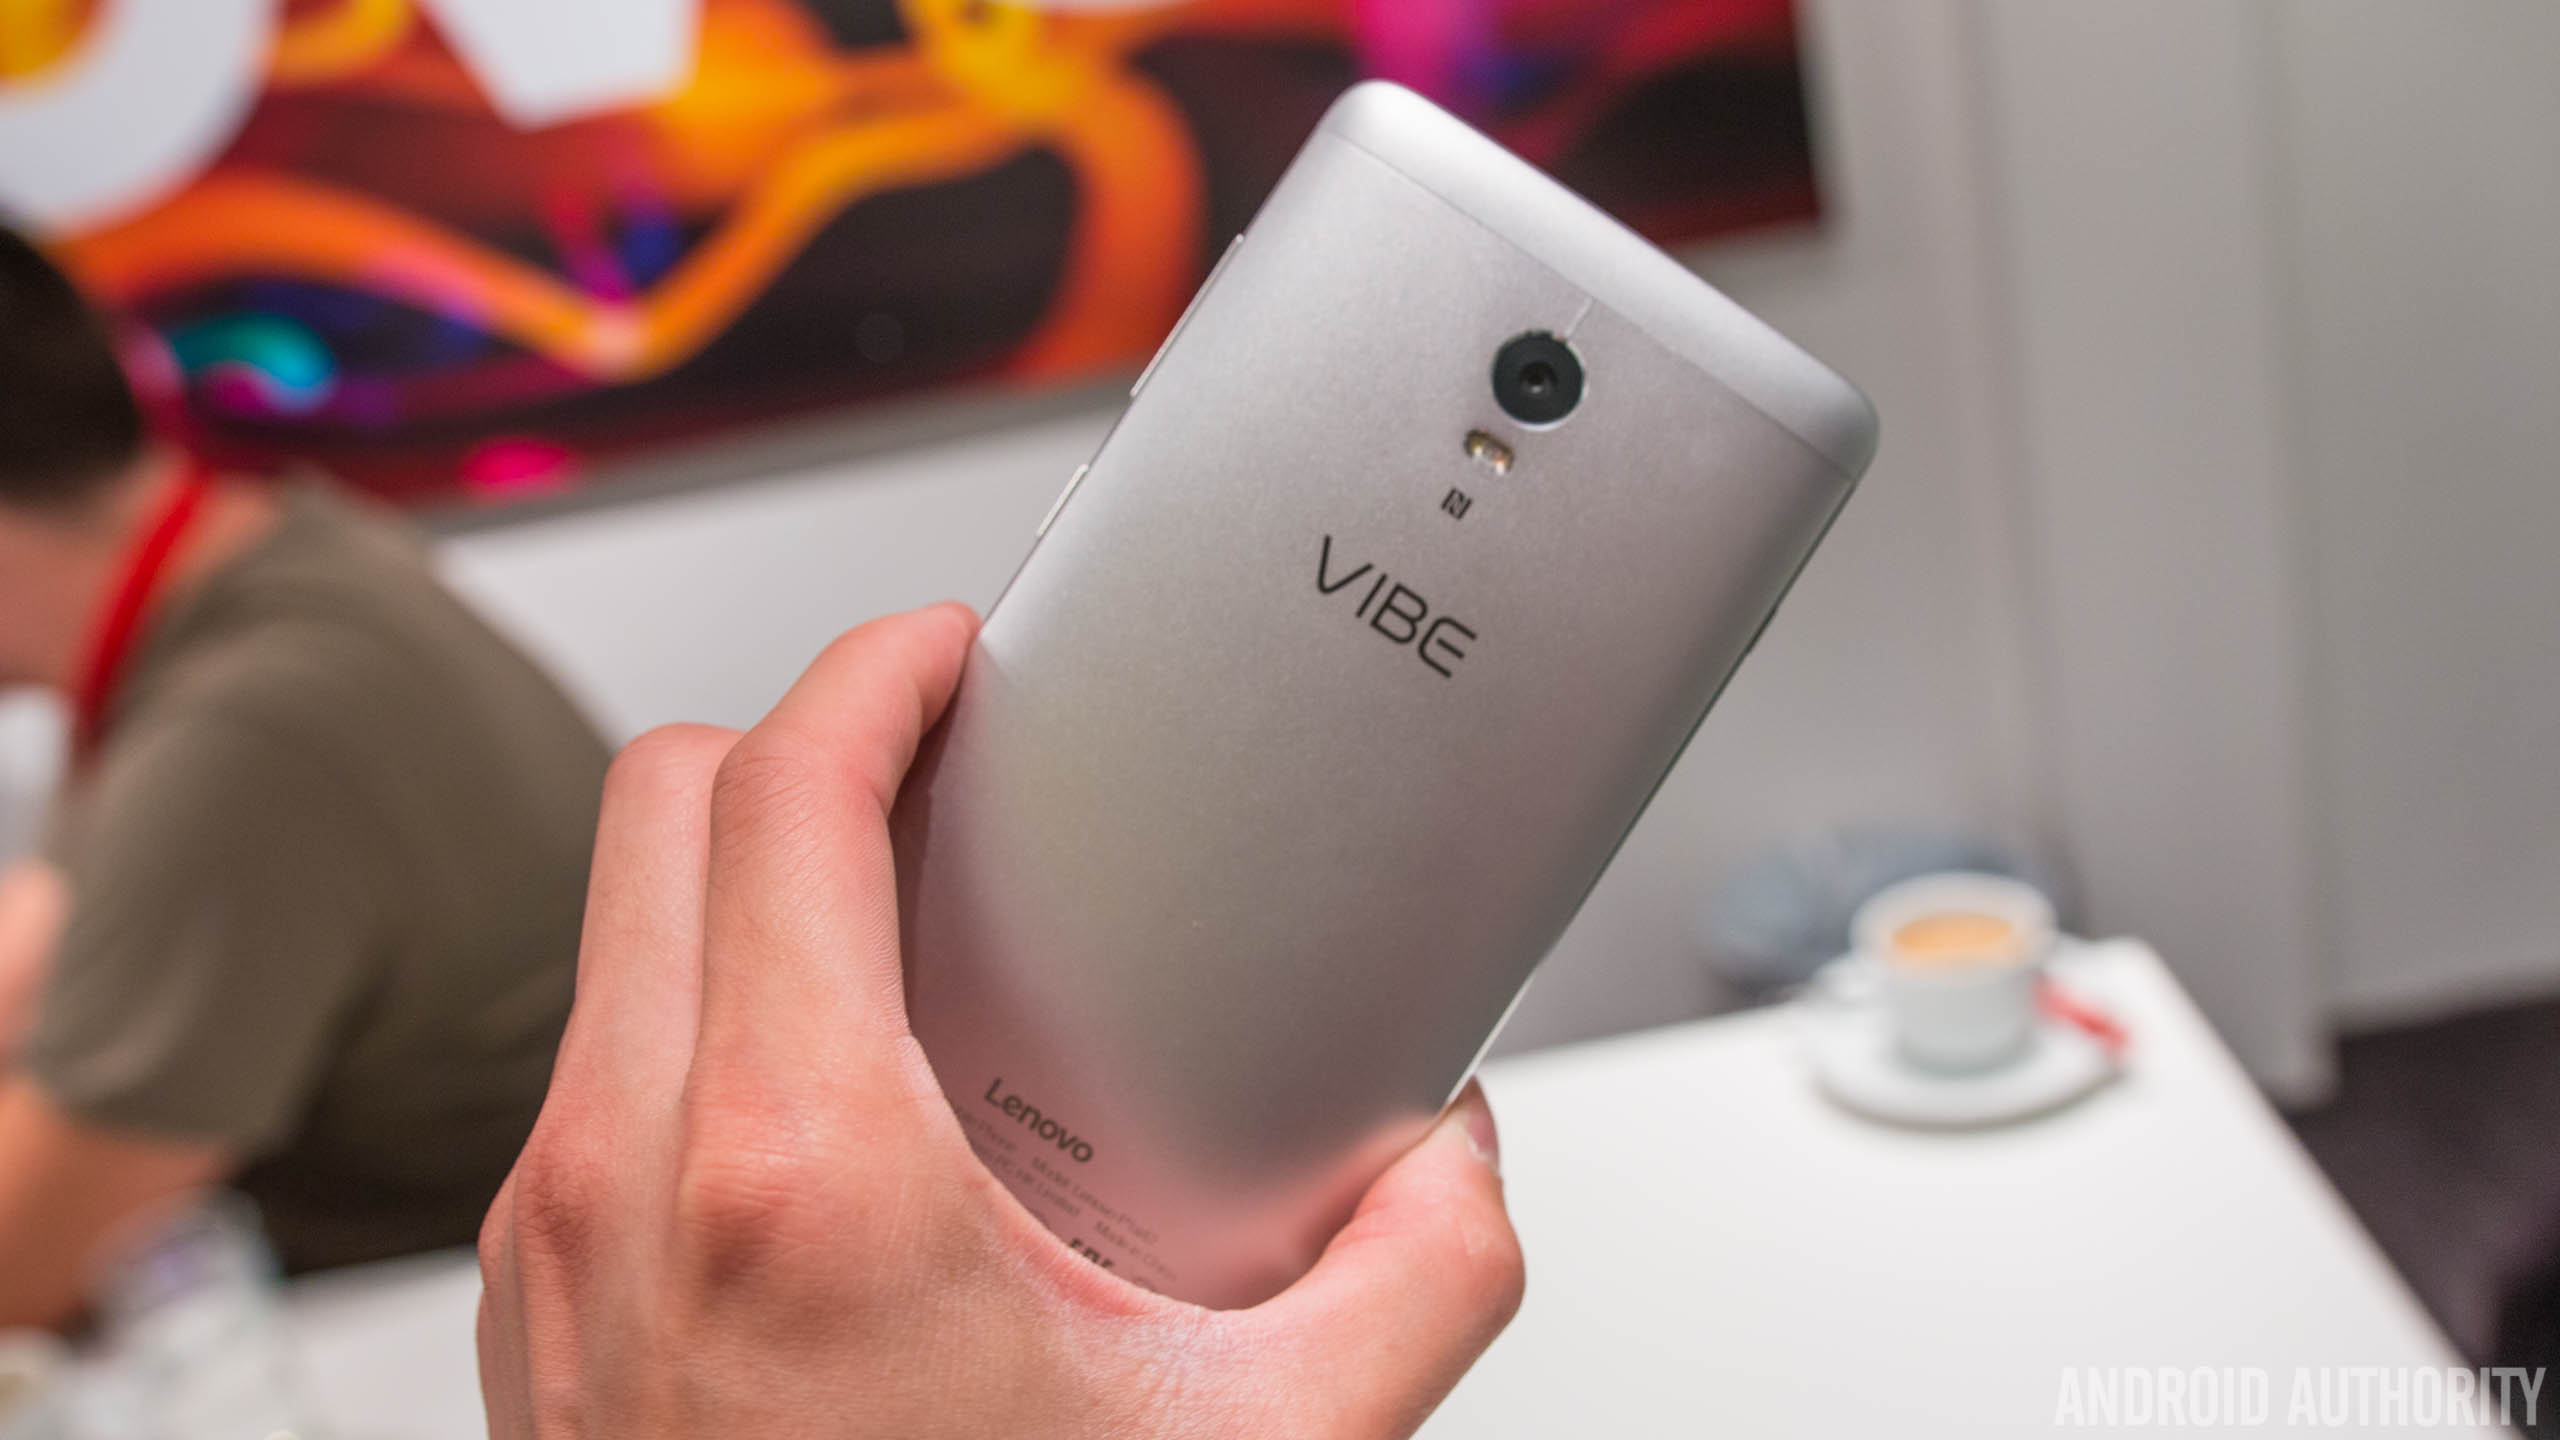 Lenovo Vibe S1 and Vibe P1 hands on and first look